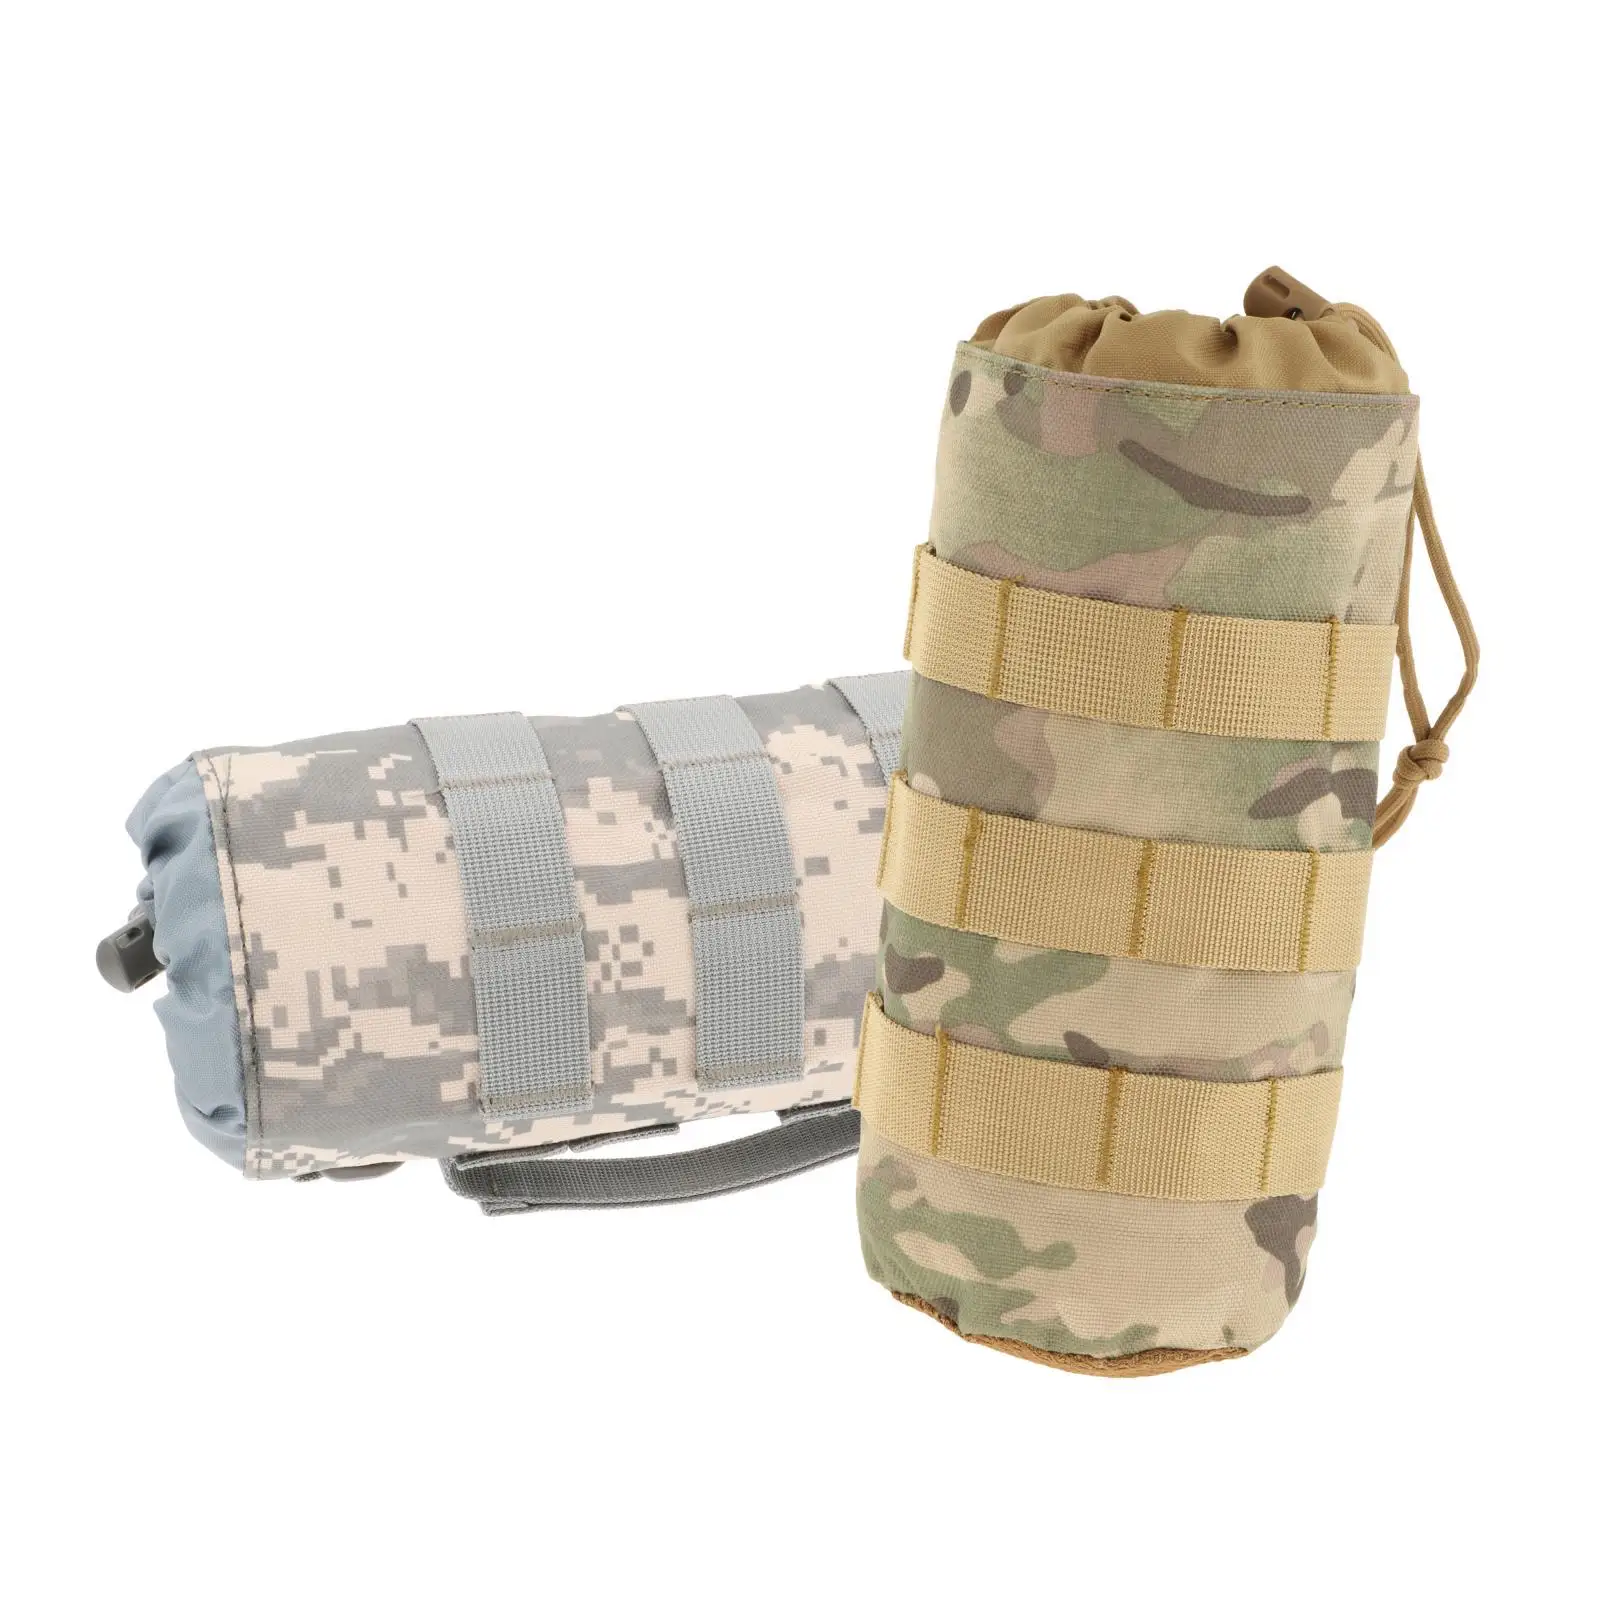 Molle Water Bottle Bag Pouch Travel Holder Sport Bag Outdoor Camping Hydration Bags For Camping Hiking Fishing Bags